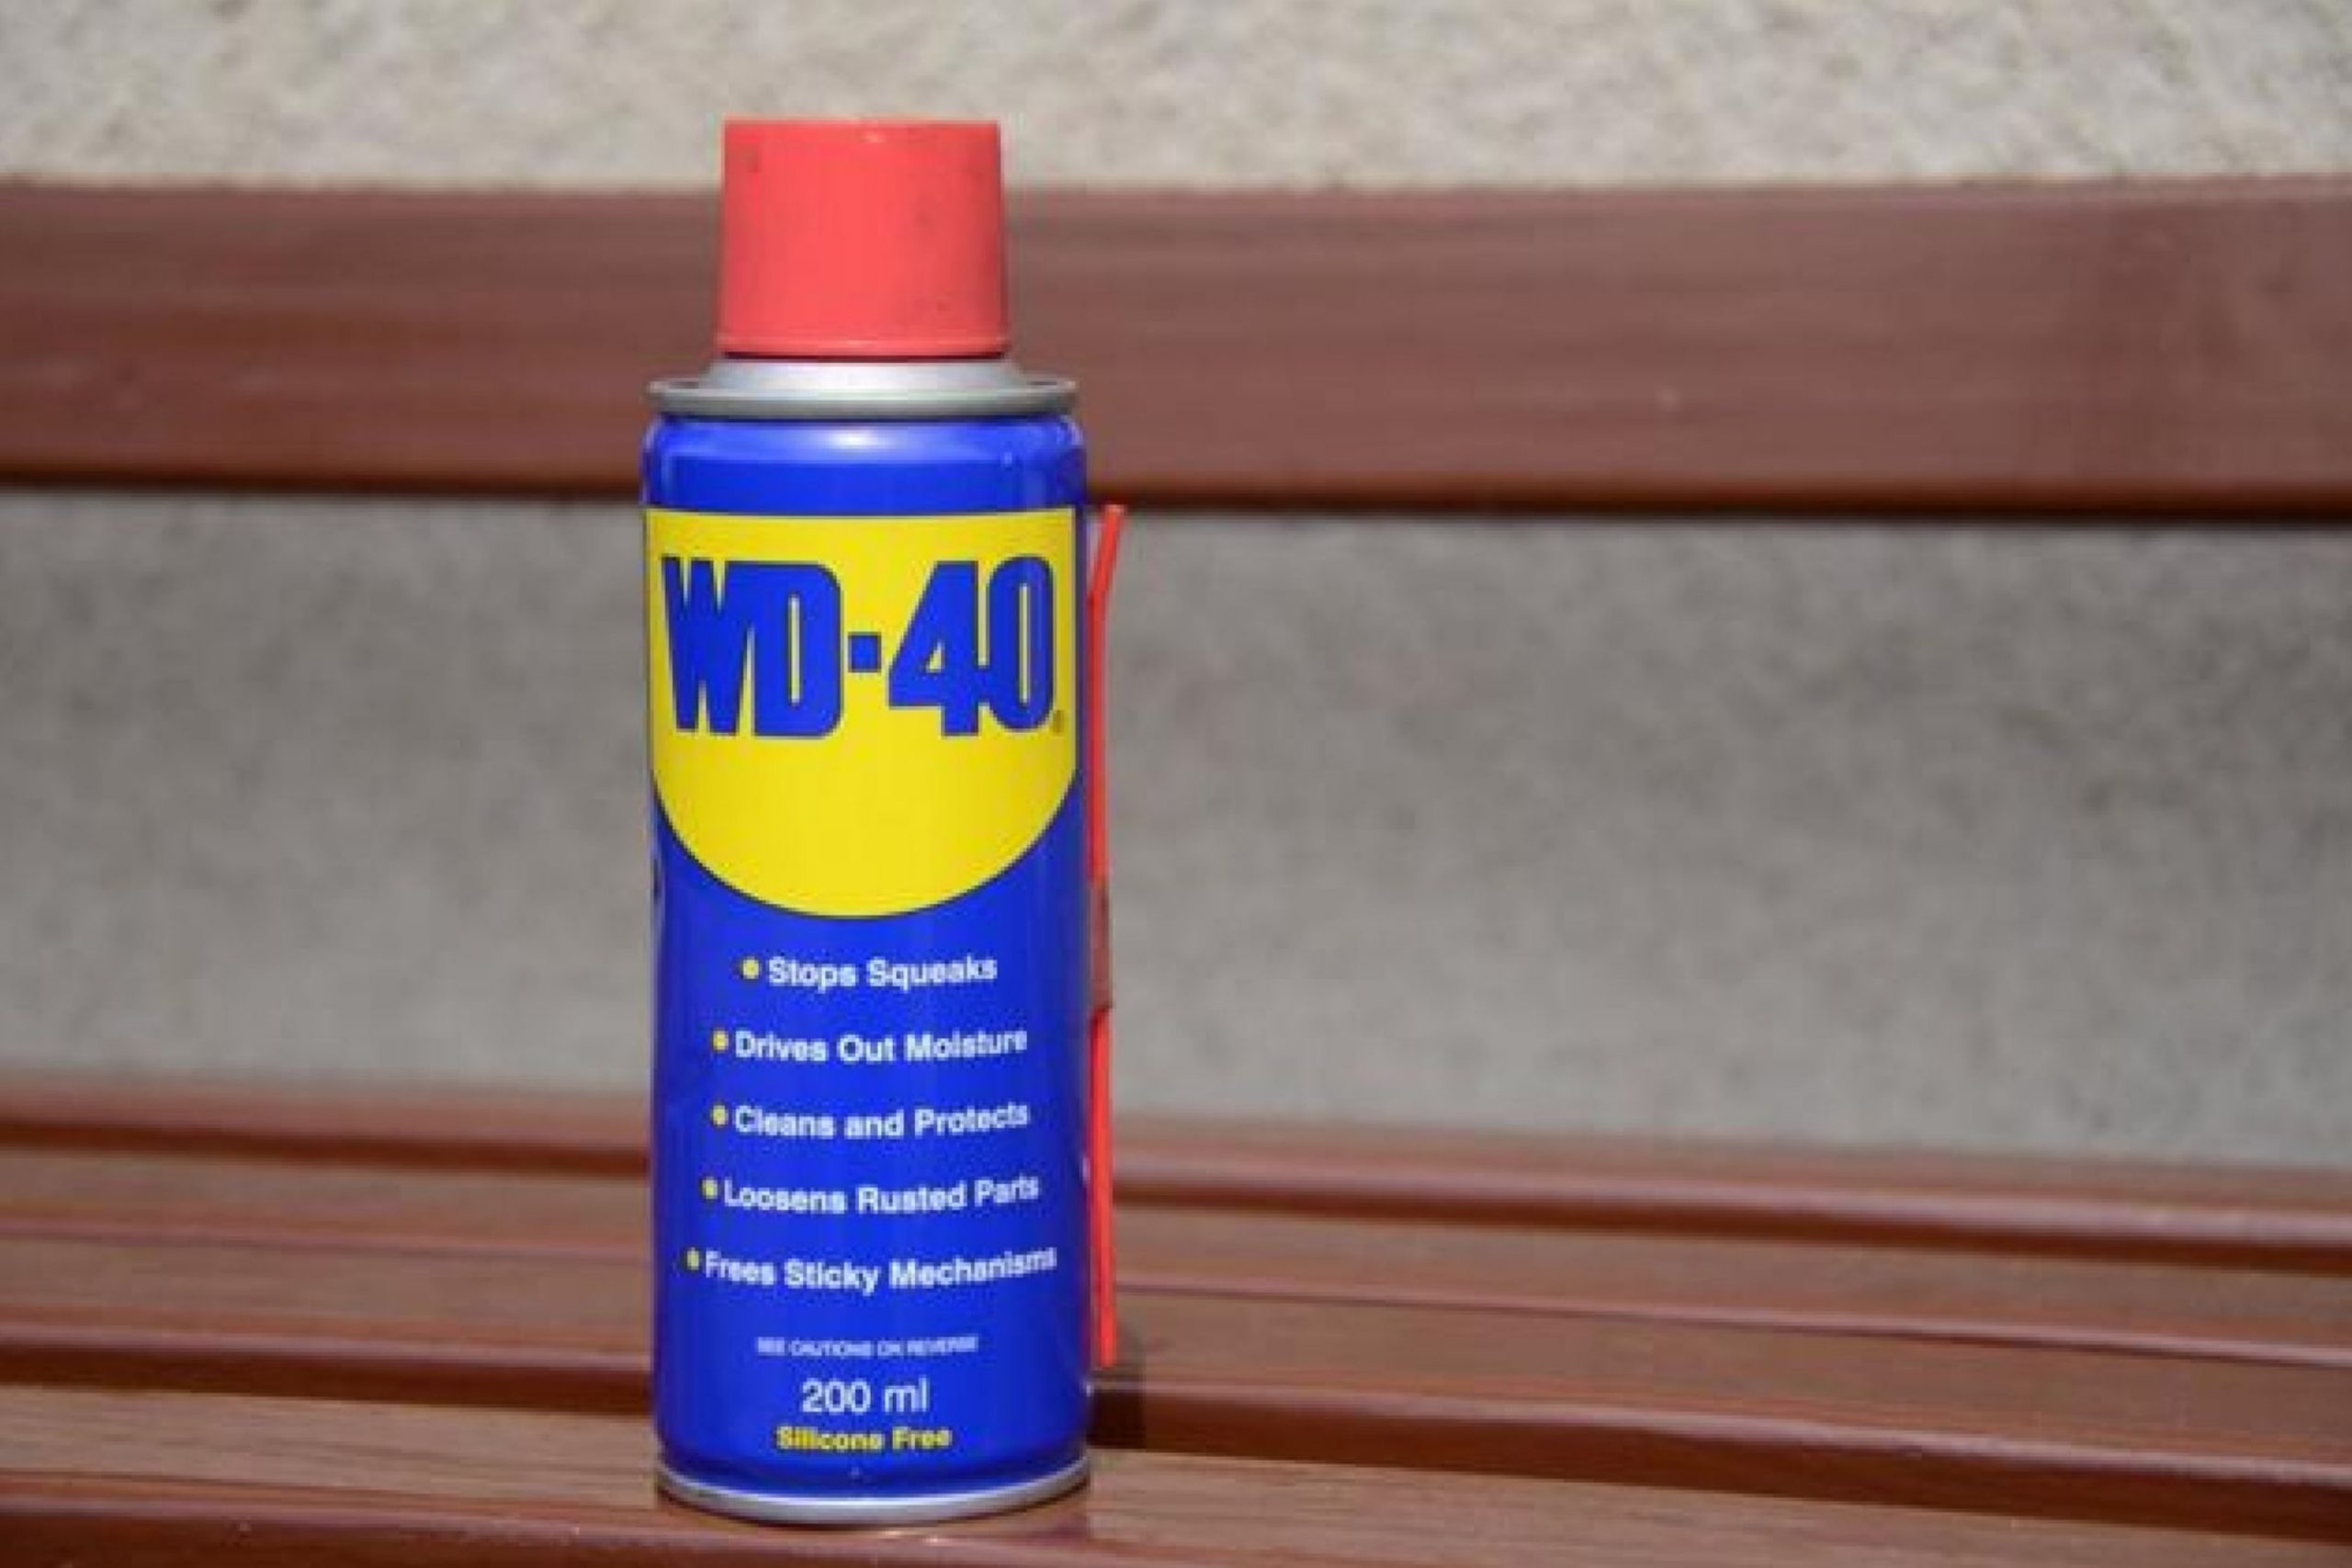 As a Lubricant For Removing Water Deposits